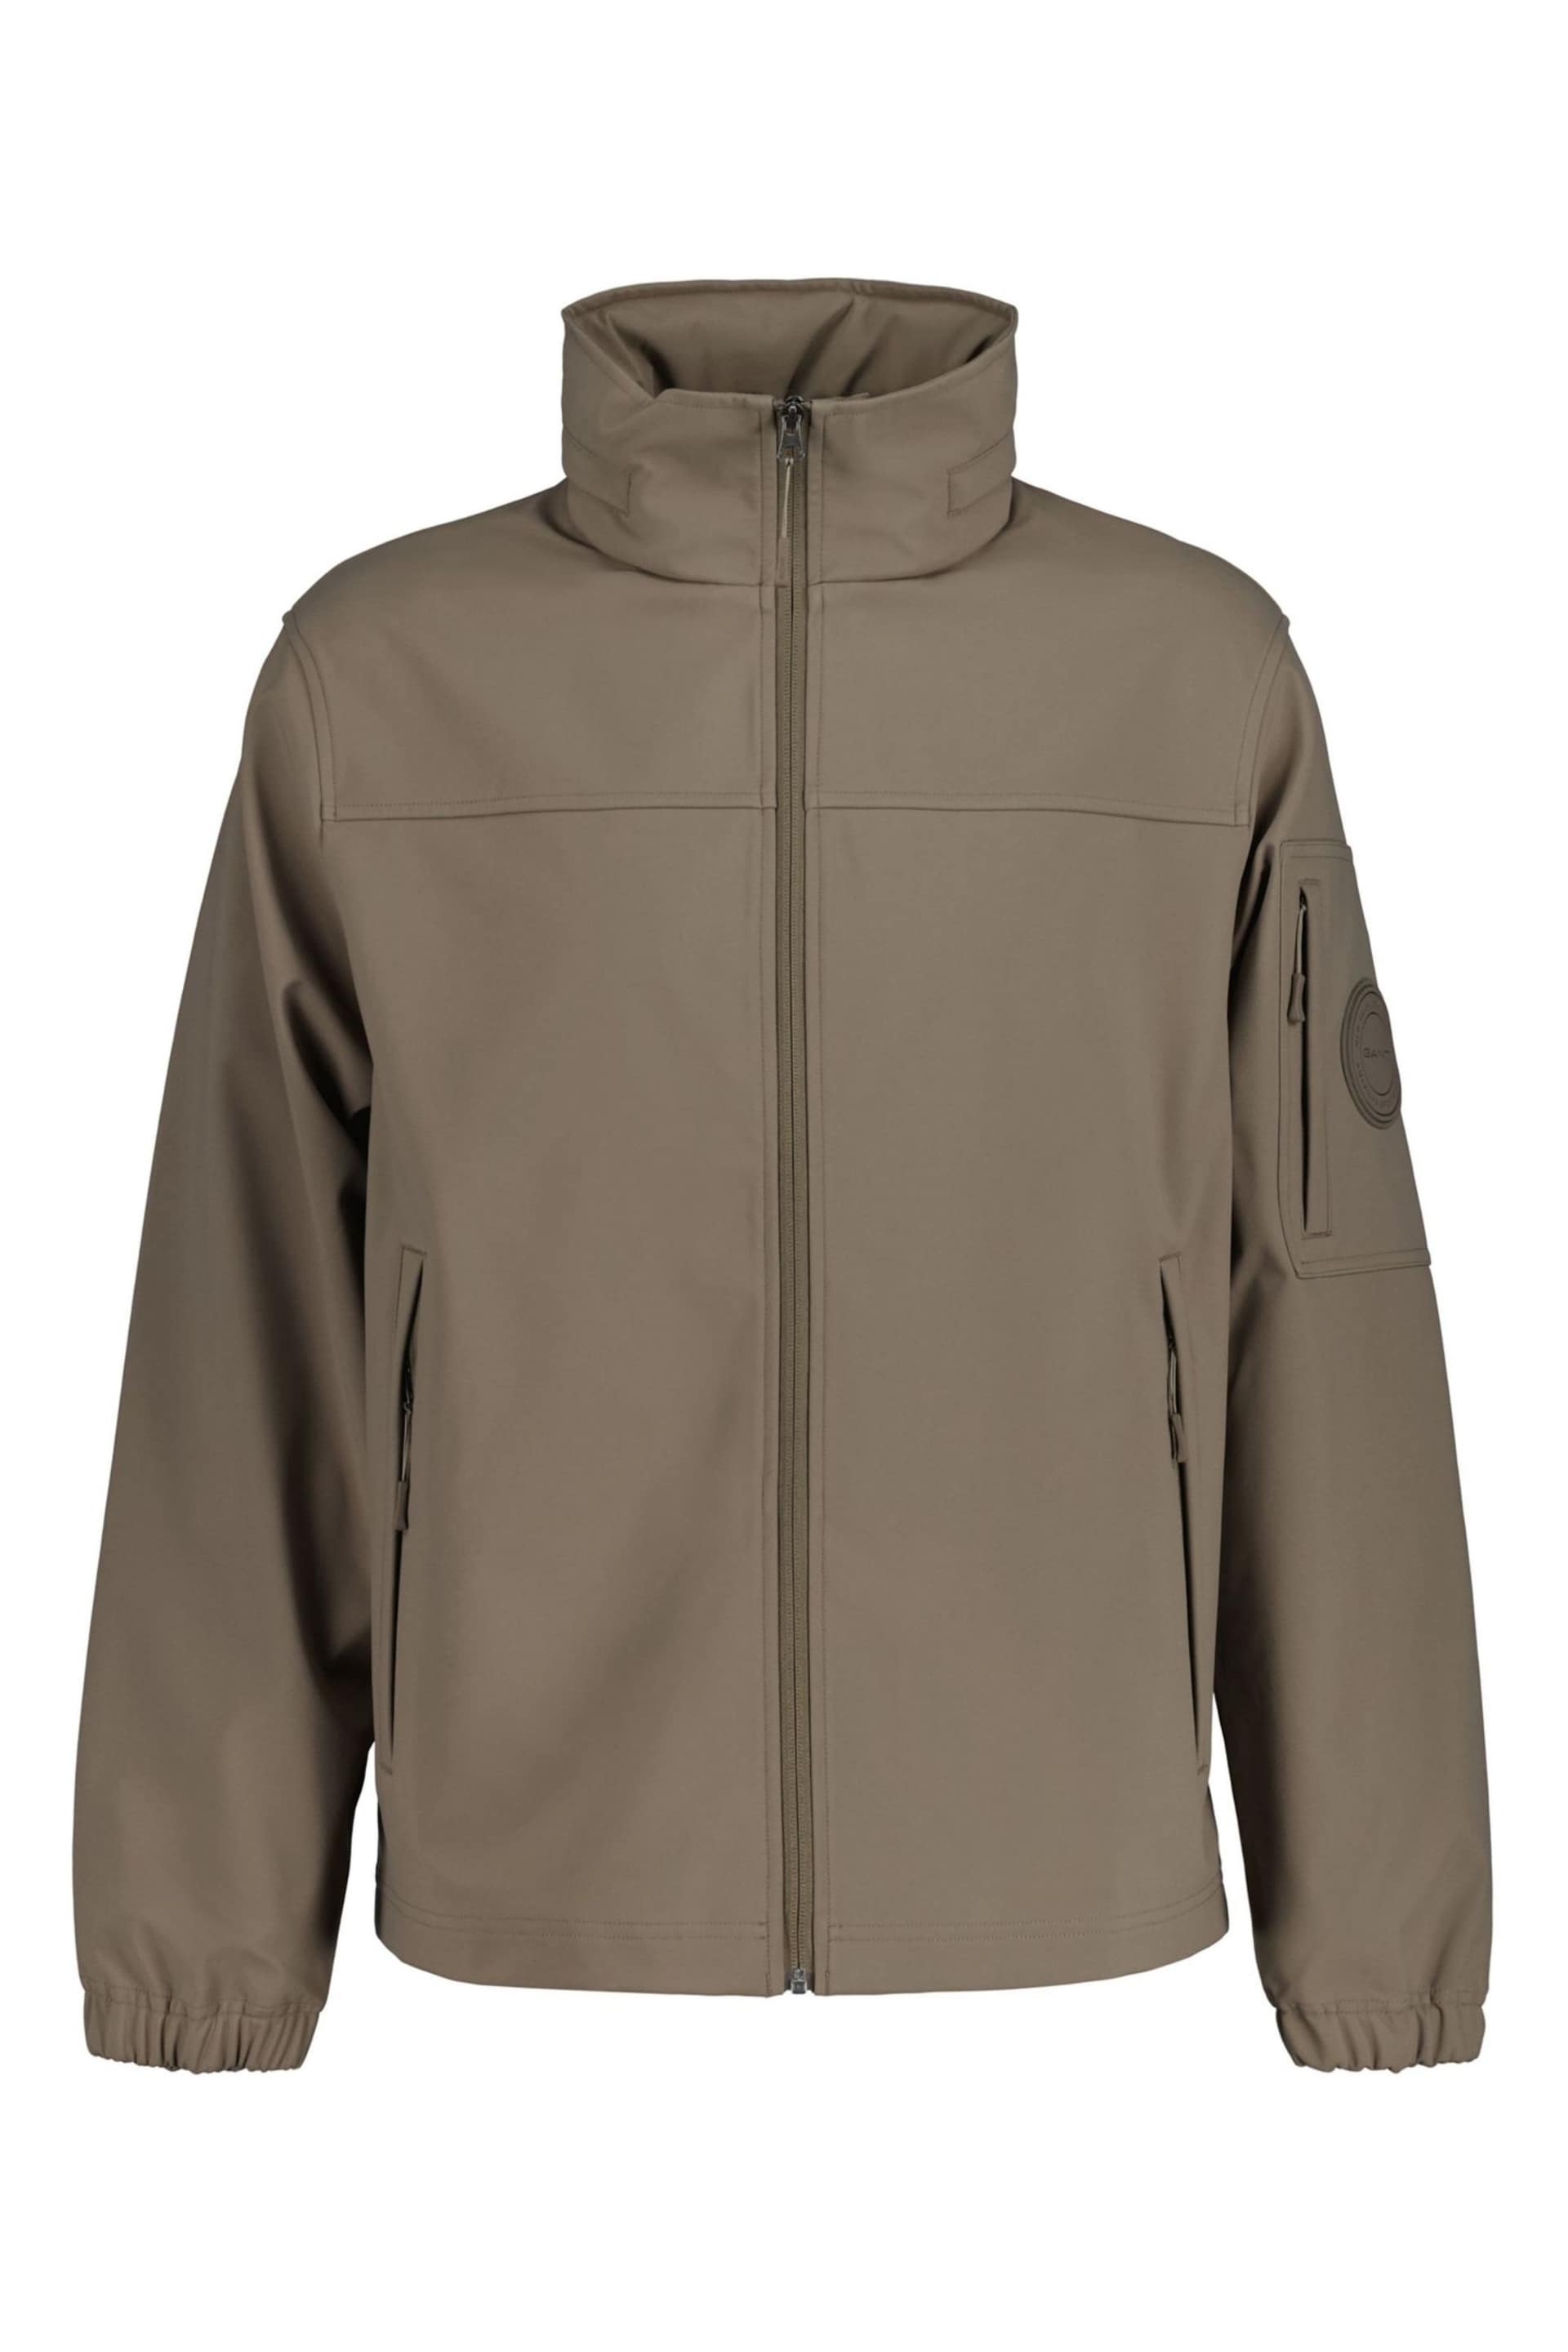 GANT Soft Shell Water Repellent Jacket - Image 7 of 8